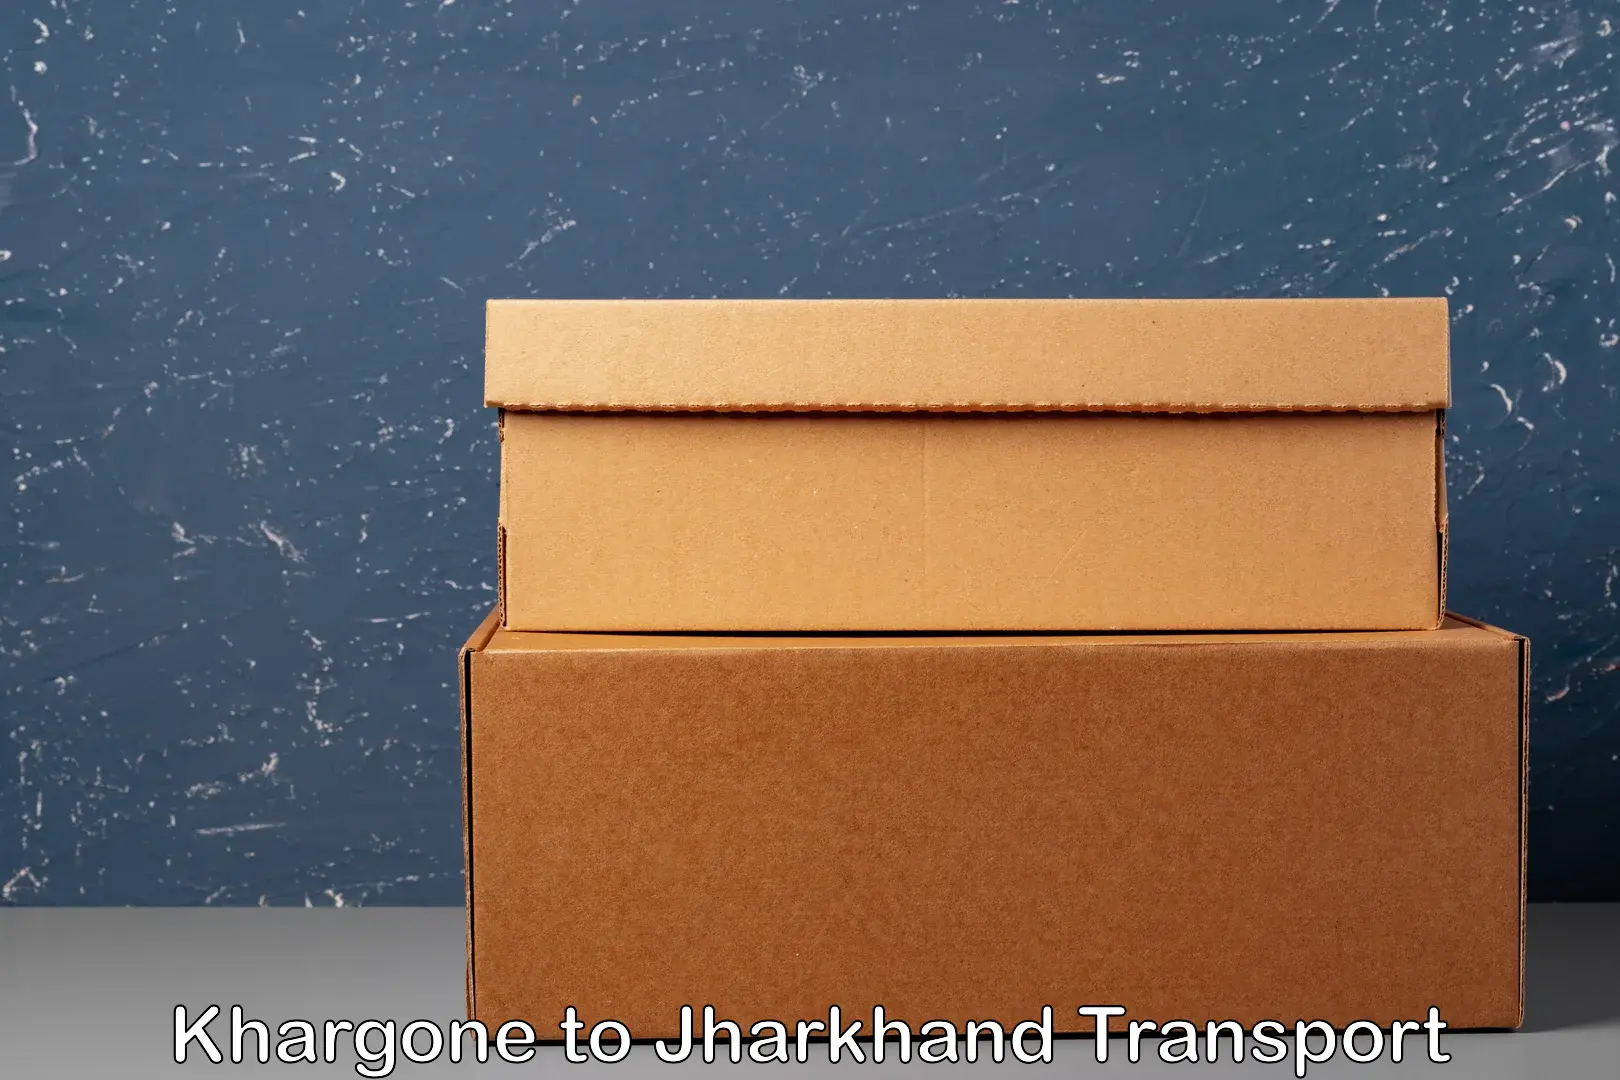 Air freight transport services Khargone to Tisri